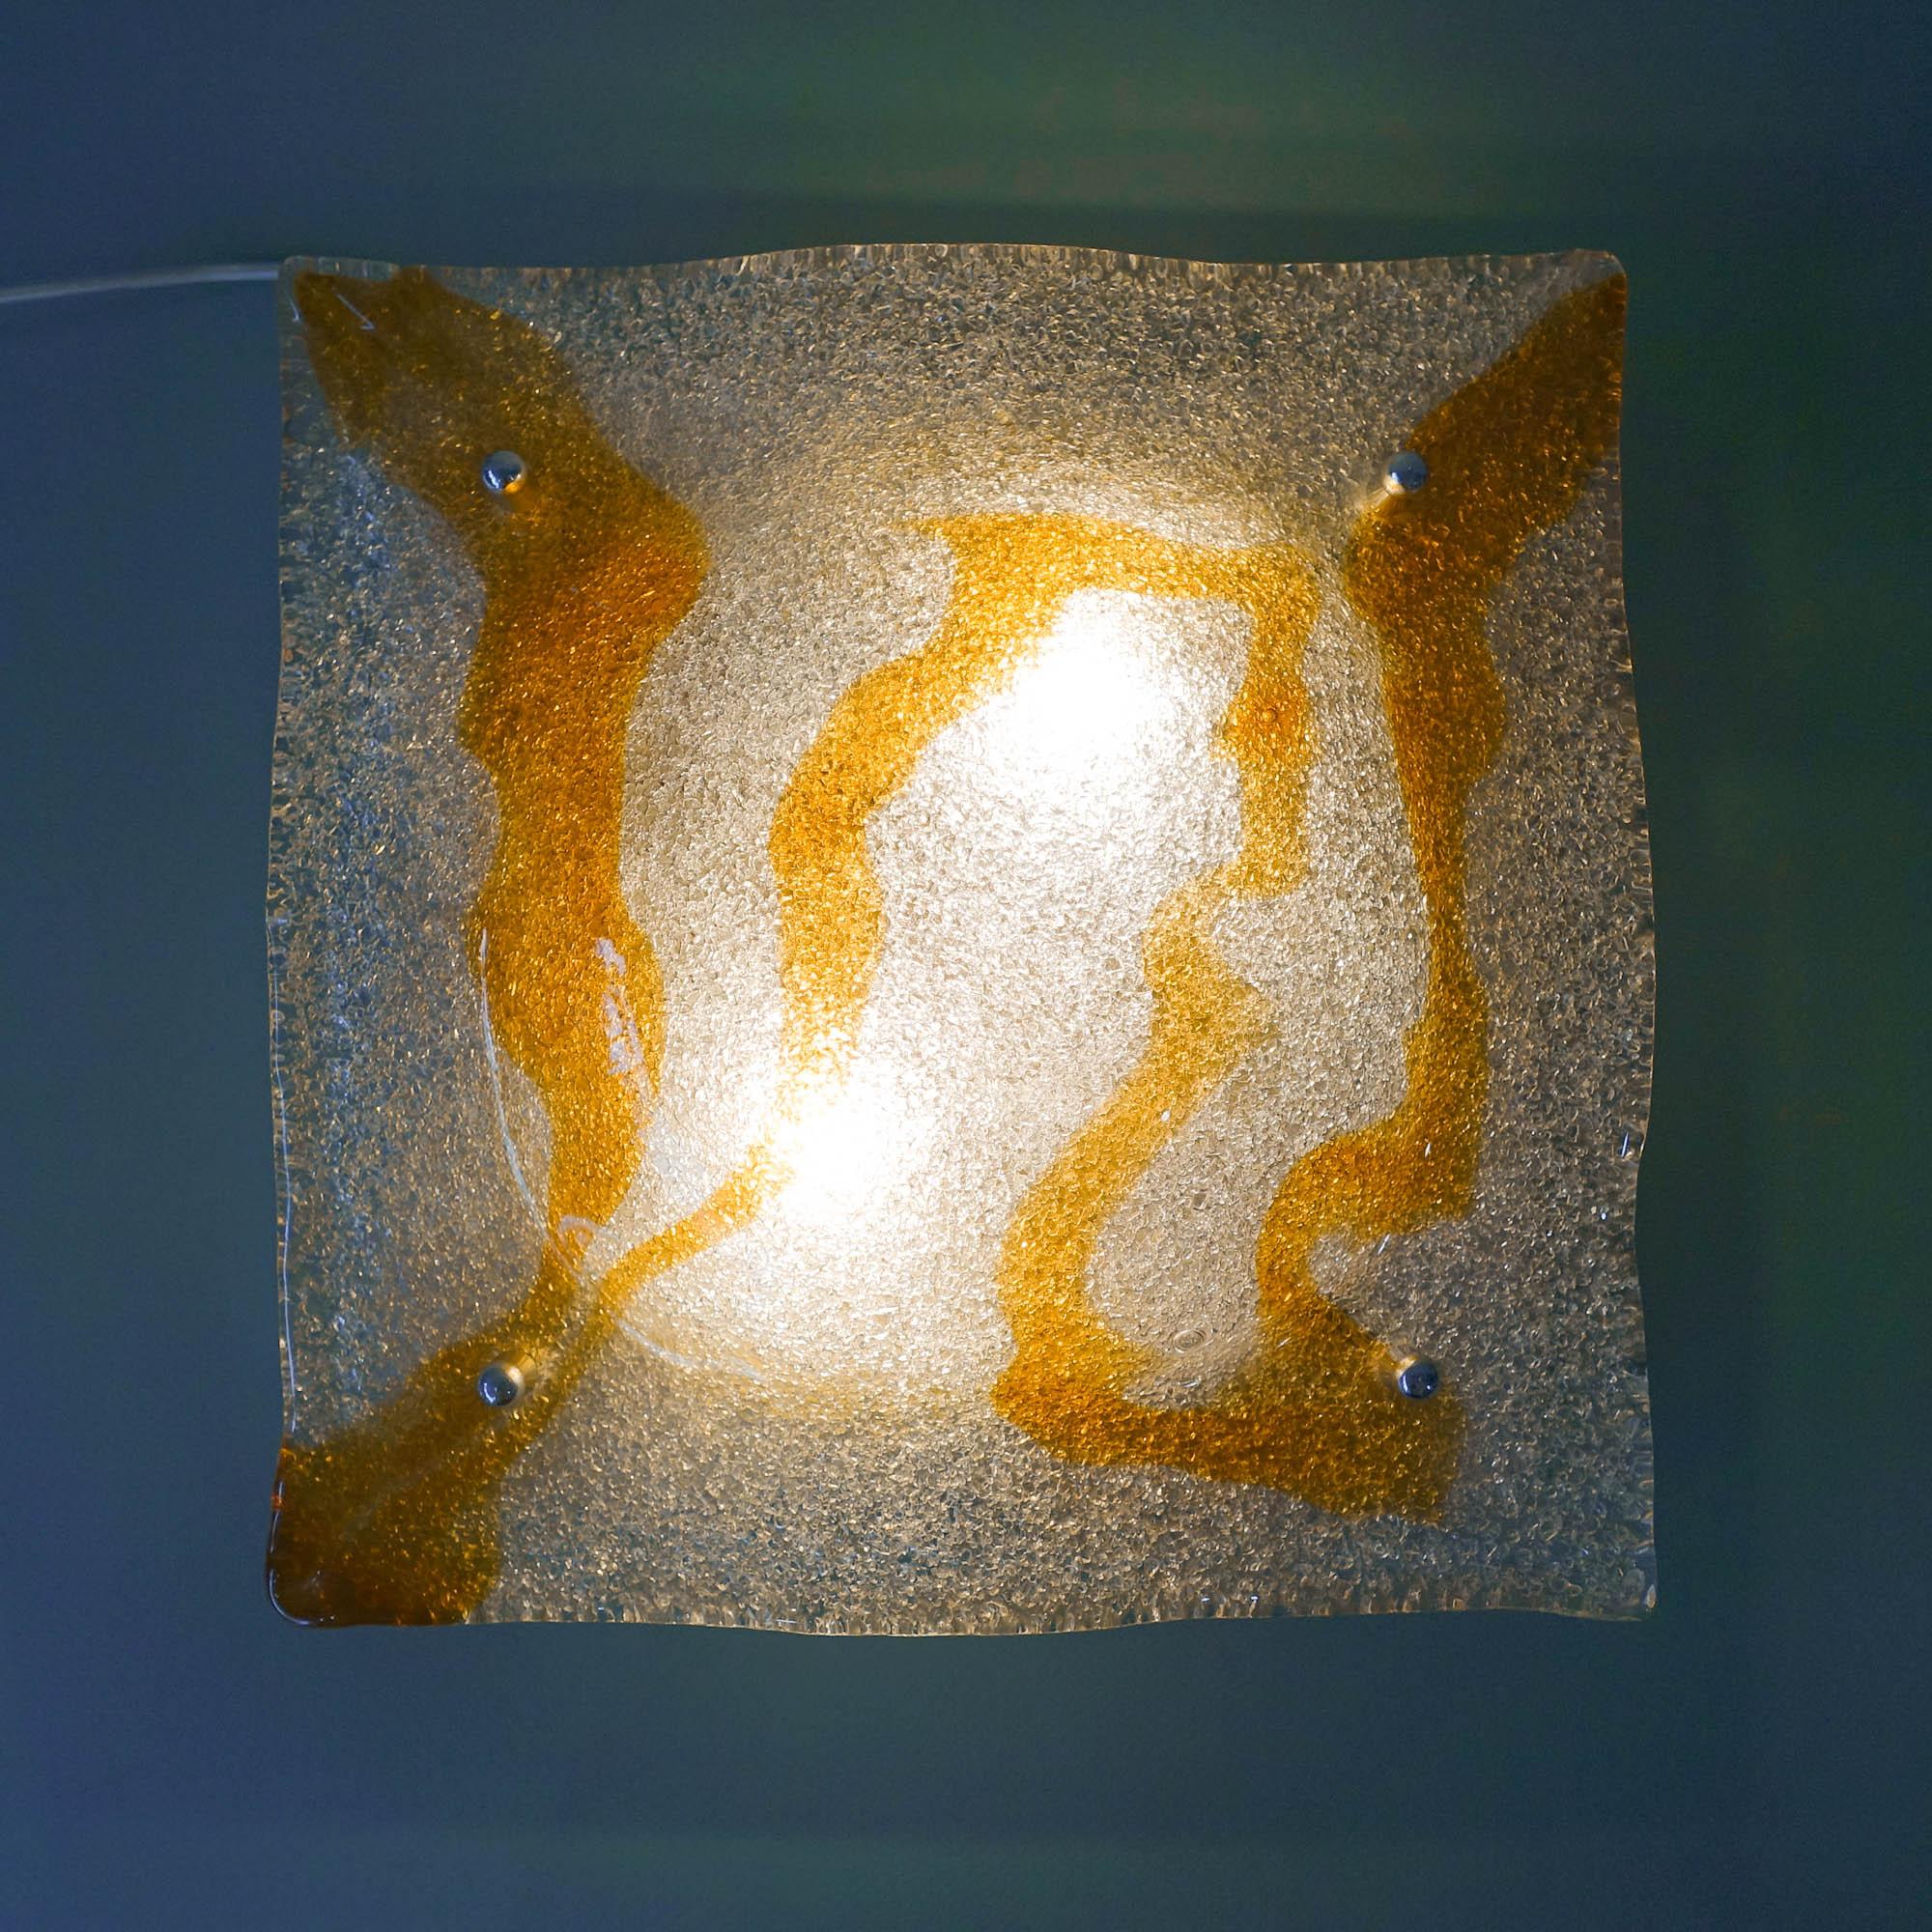 This sconce was designed by Toni Zuccheri for Mazzega in Italy, during the 1960's. It has a thick wavy amber and clear Murano glass mounted on a chrome wall plate. The glass is handmade with small bubbles (pulegoso) inside the glass and sprinkled